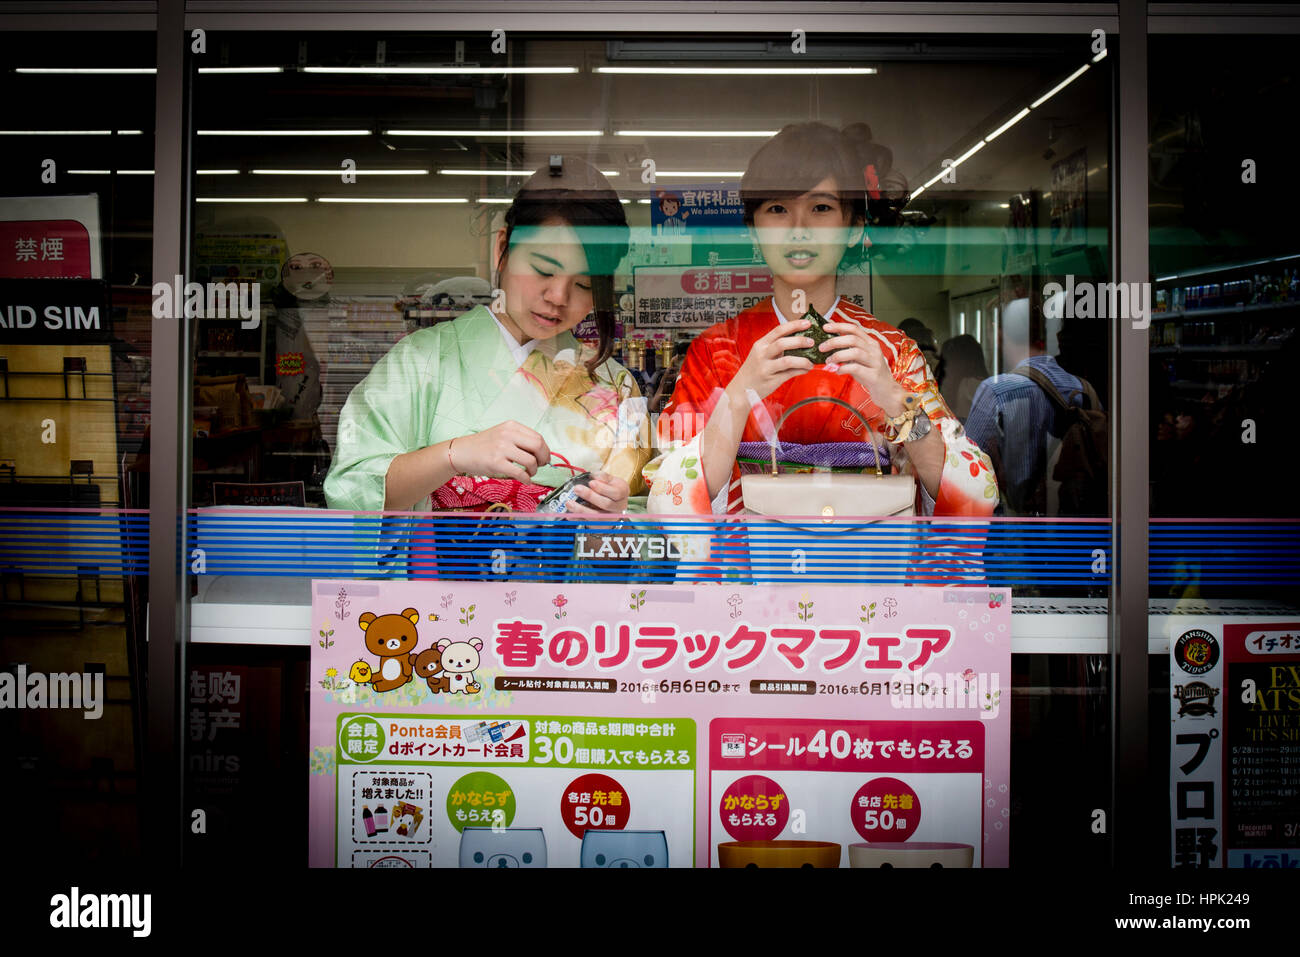 Two young women in kimono eating snacks in a convenient store, Kyoto, Japan Stock Photo